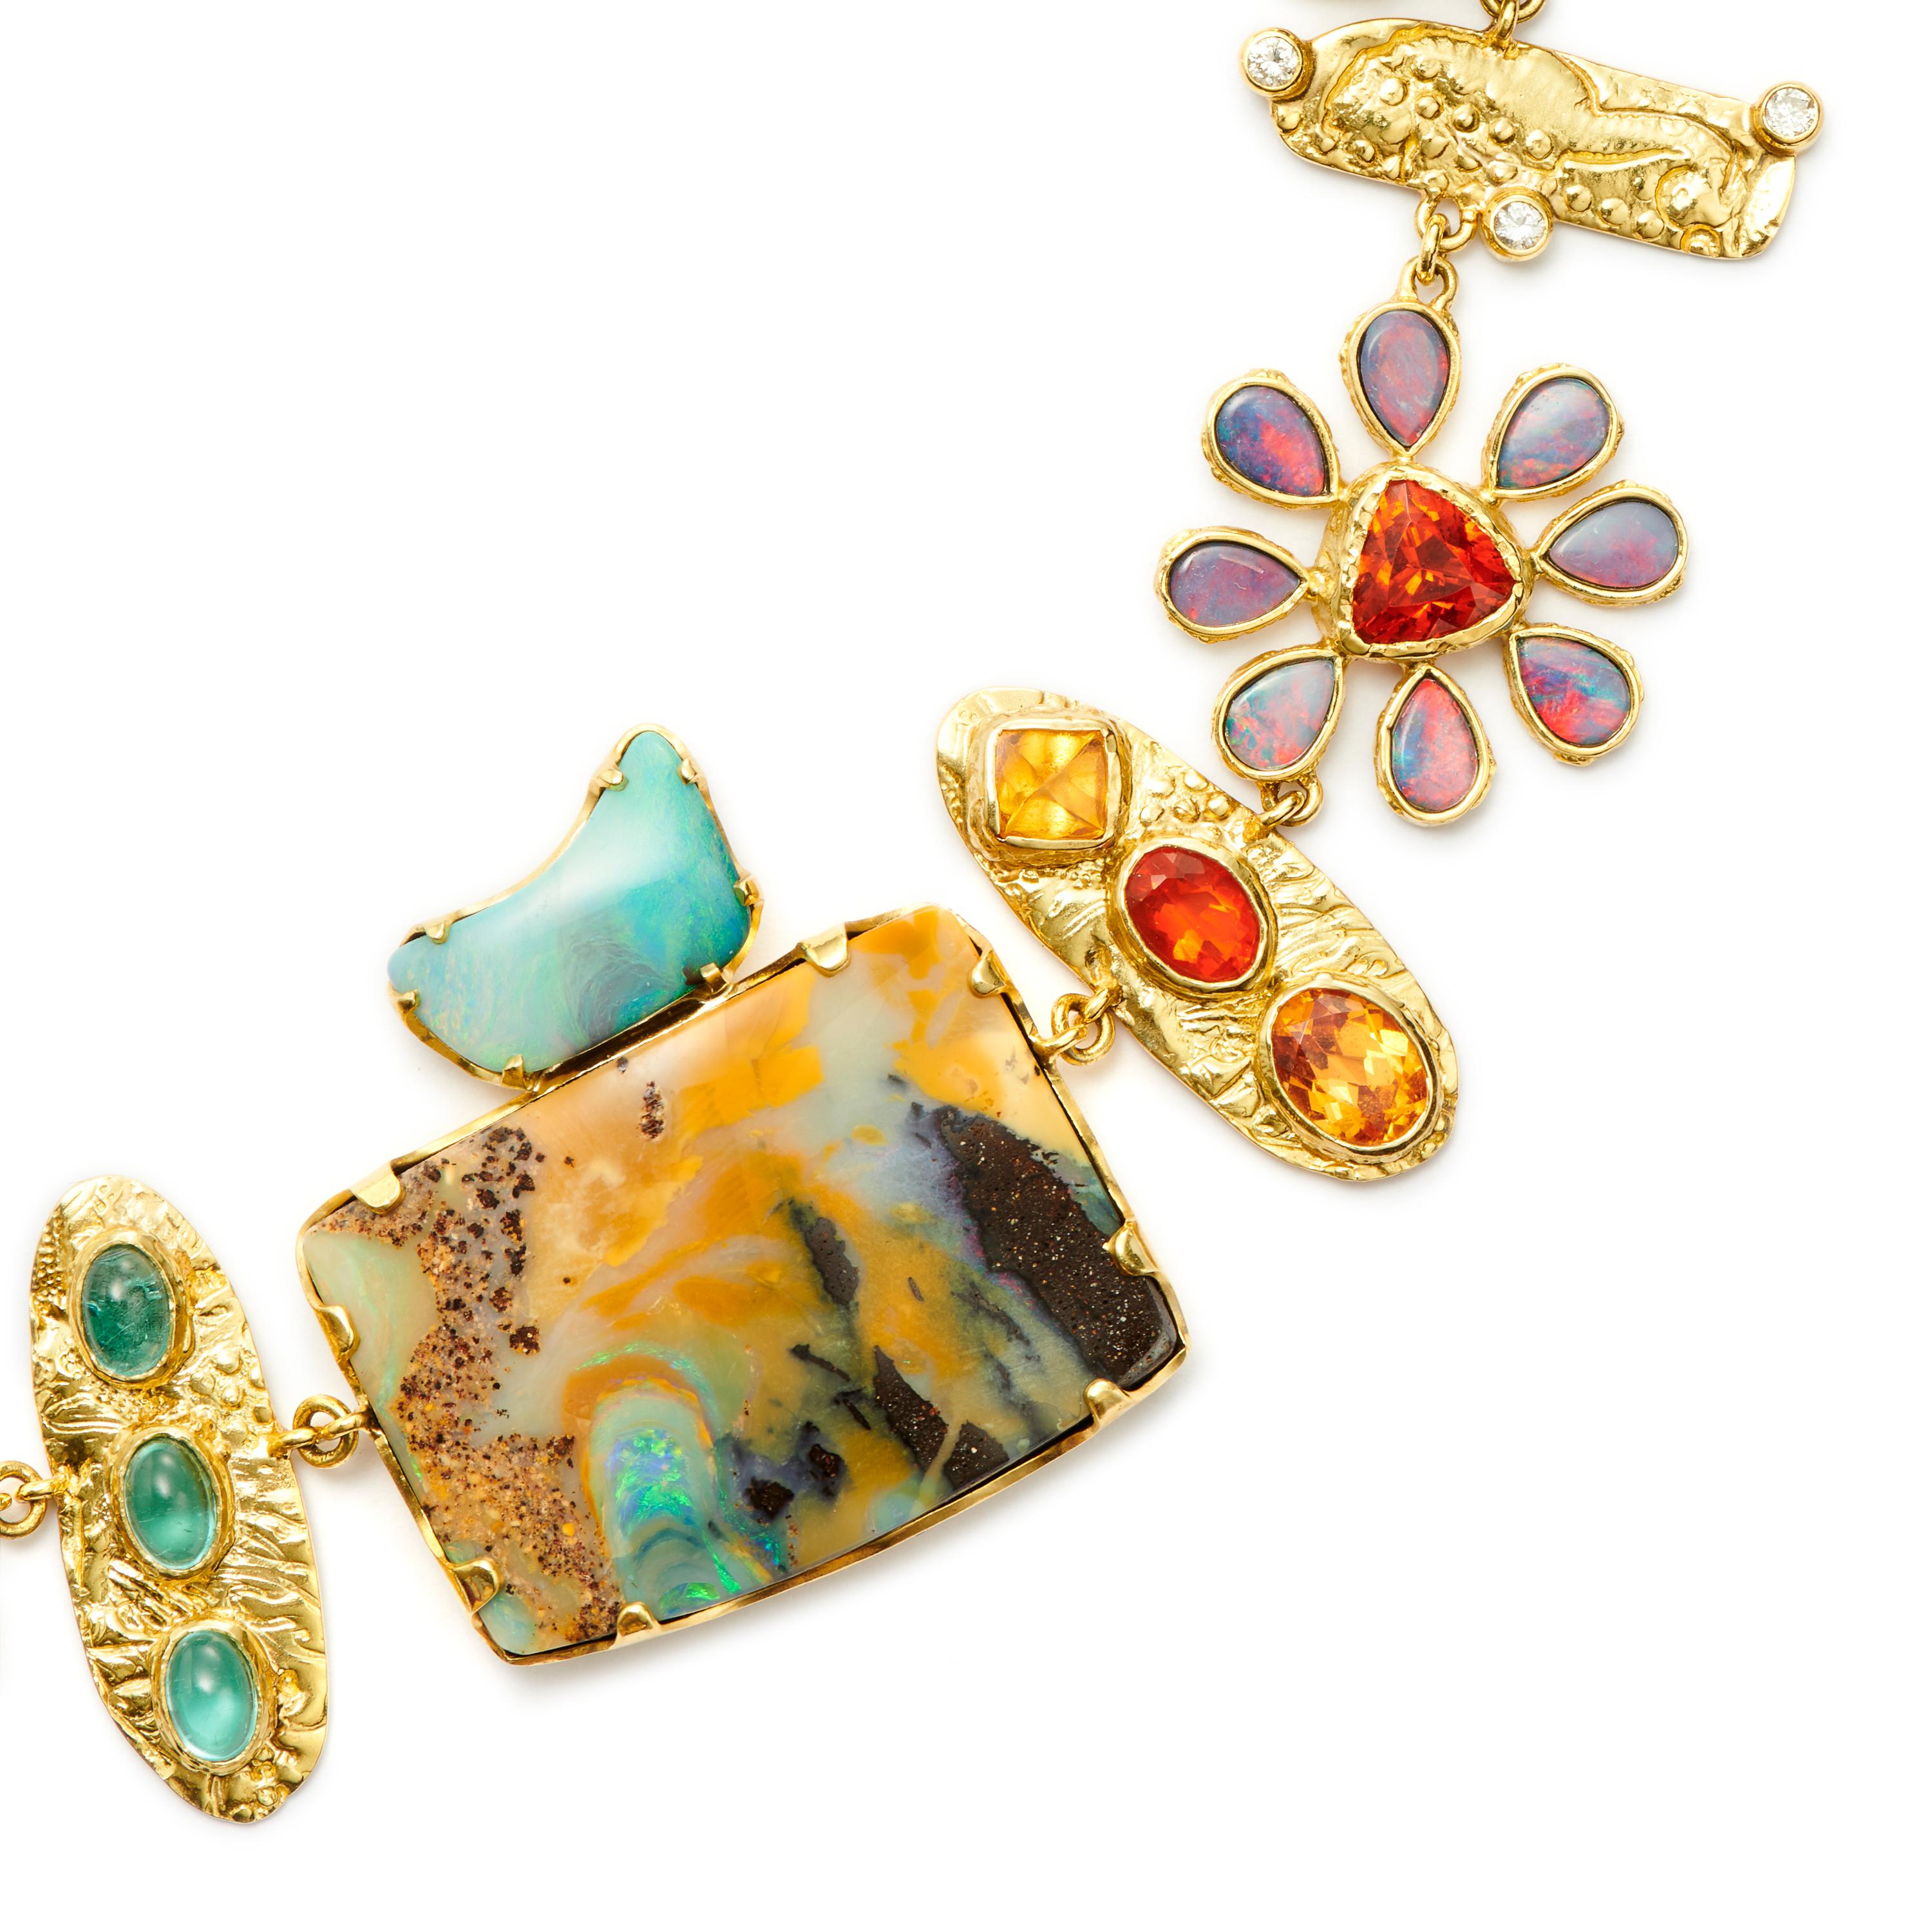 The dramatic and whimsical Opus 1 necklace, set in 18 Karat Gold, is aptly named, as it is truly a work of art. This exquisitely crafted collar features:

Australian Boulder Opal: 256.3 Carat

Ethiopian Opal: 1.83 Carat

Orange, Pink and Purple